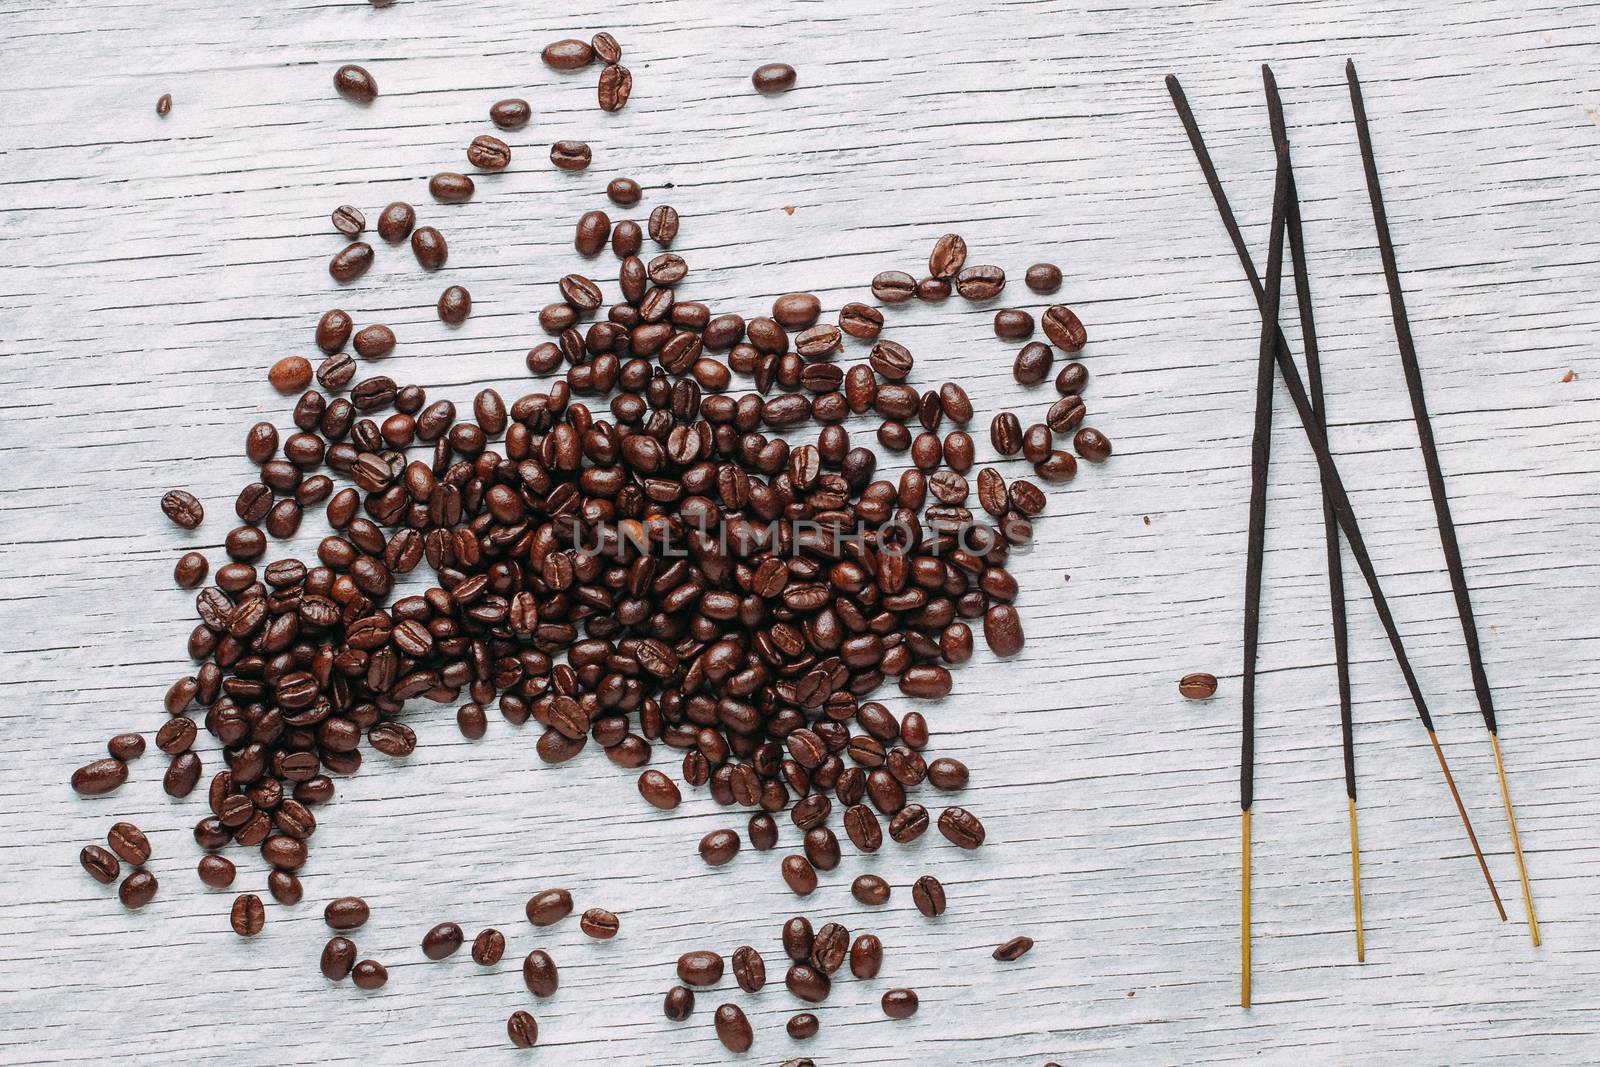 A scattering of coffee beans on a white wooden background with aromatic sticks.